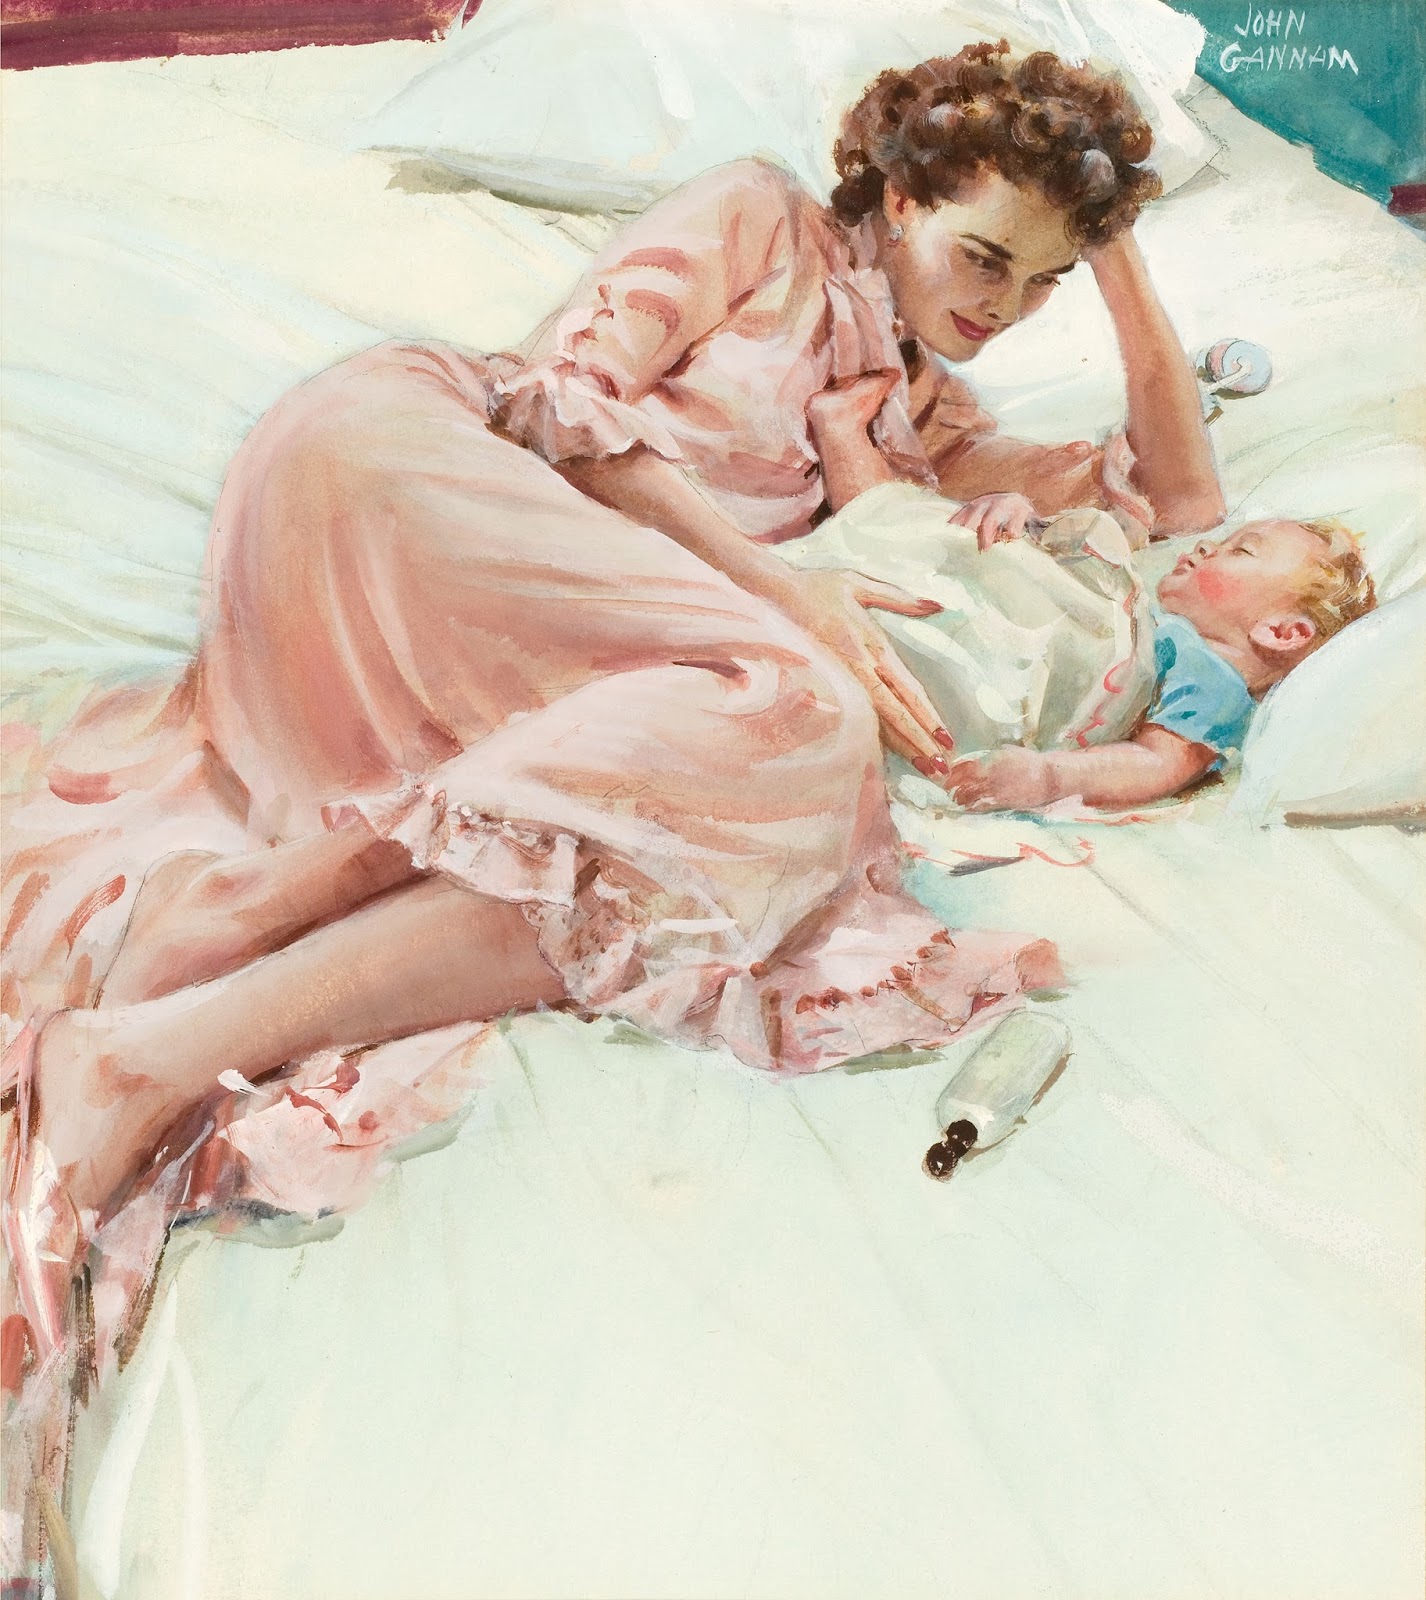 Mother and Child, Pacific Sheets ad illustration, c. 1945